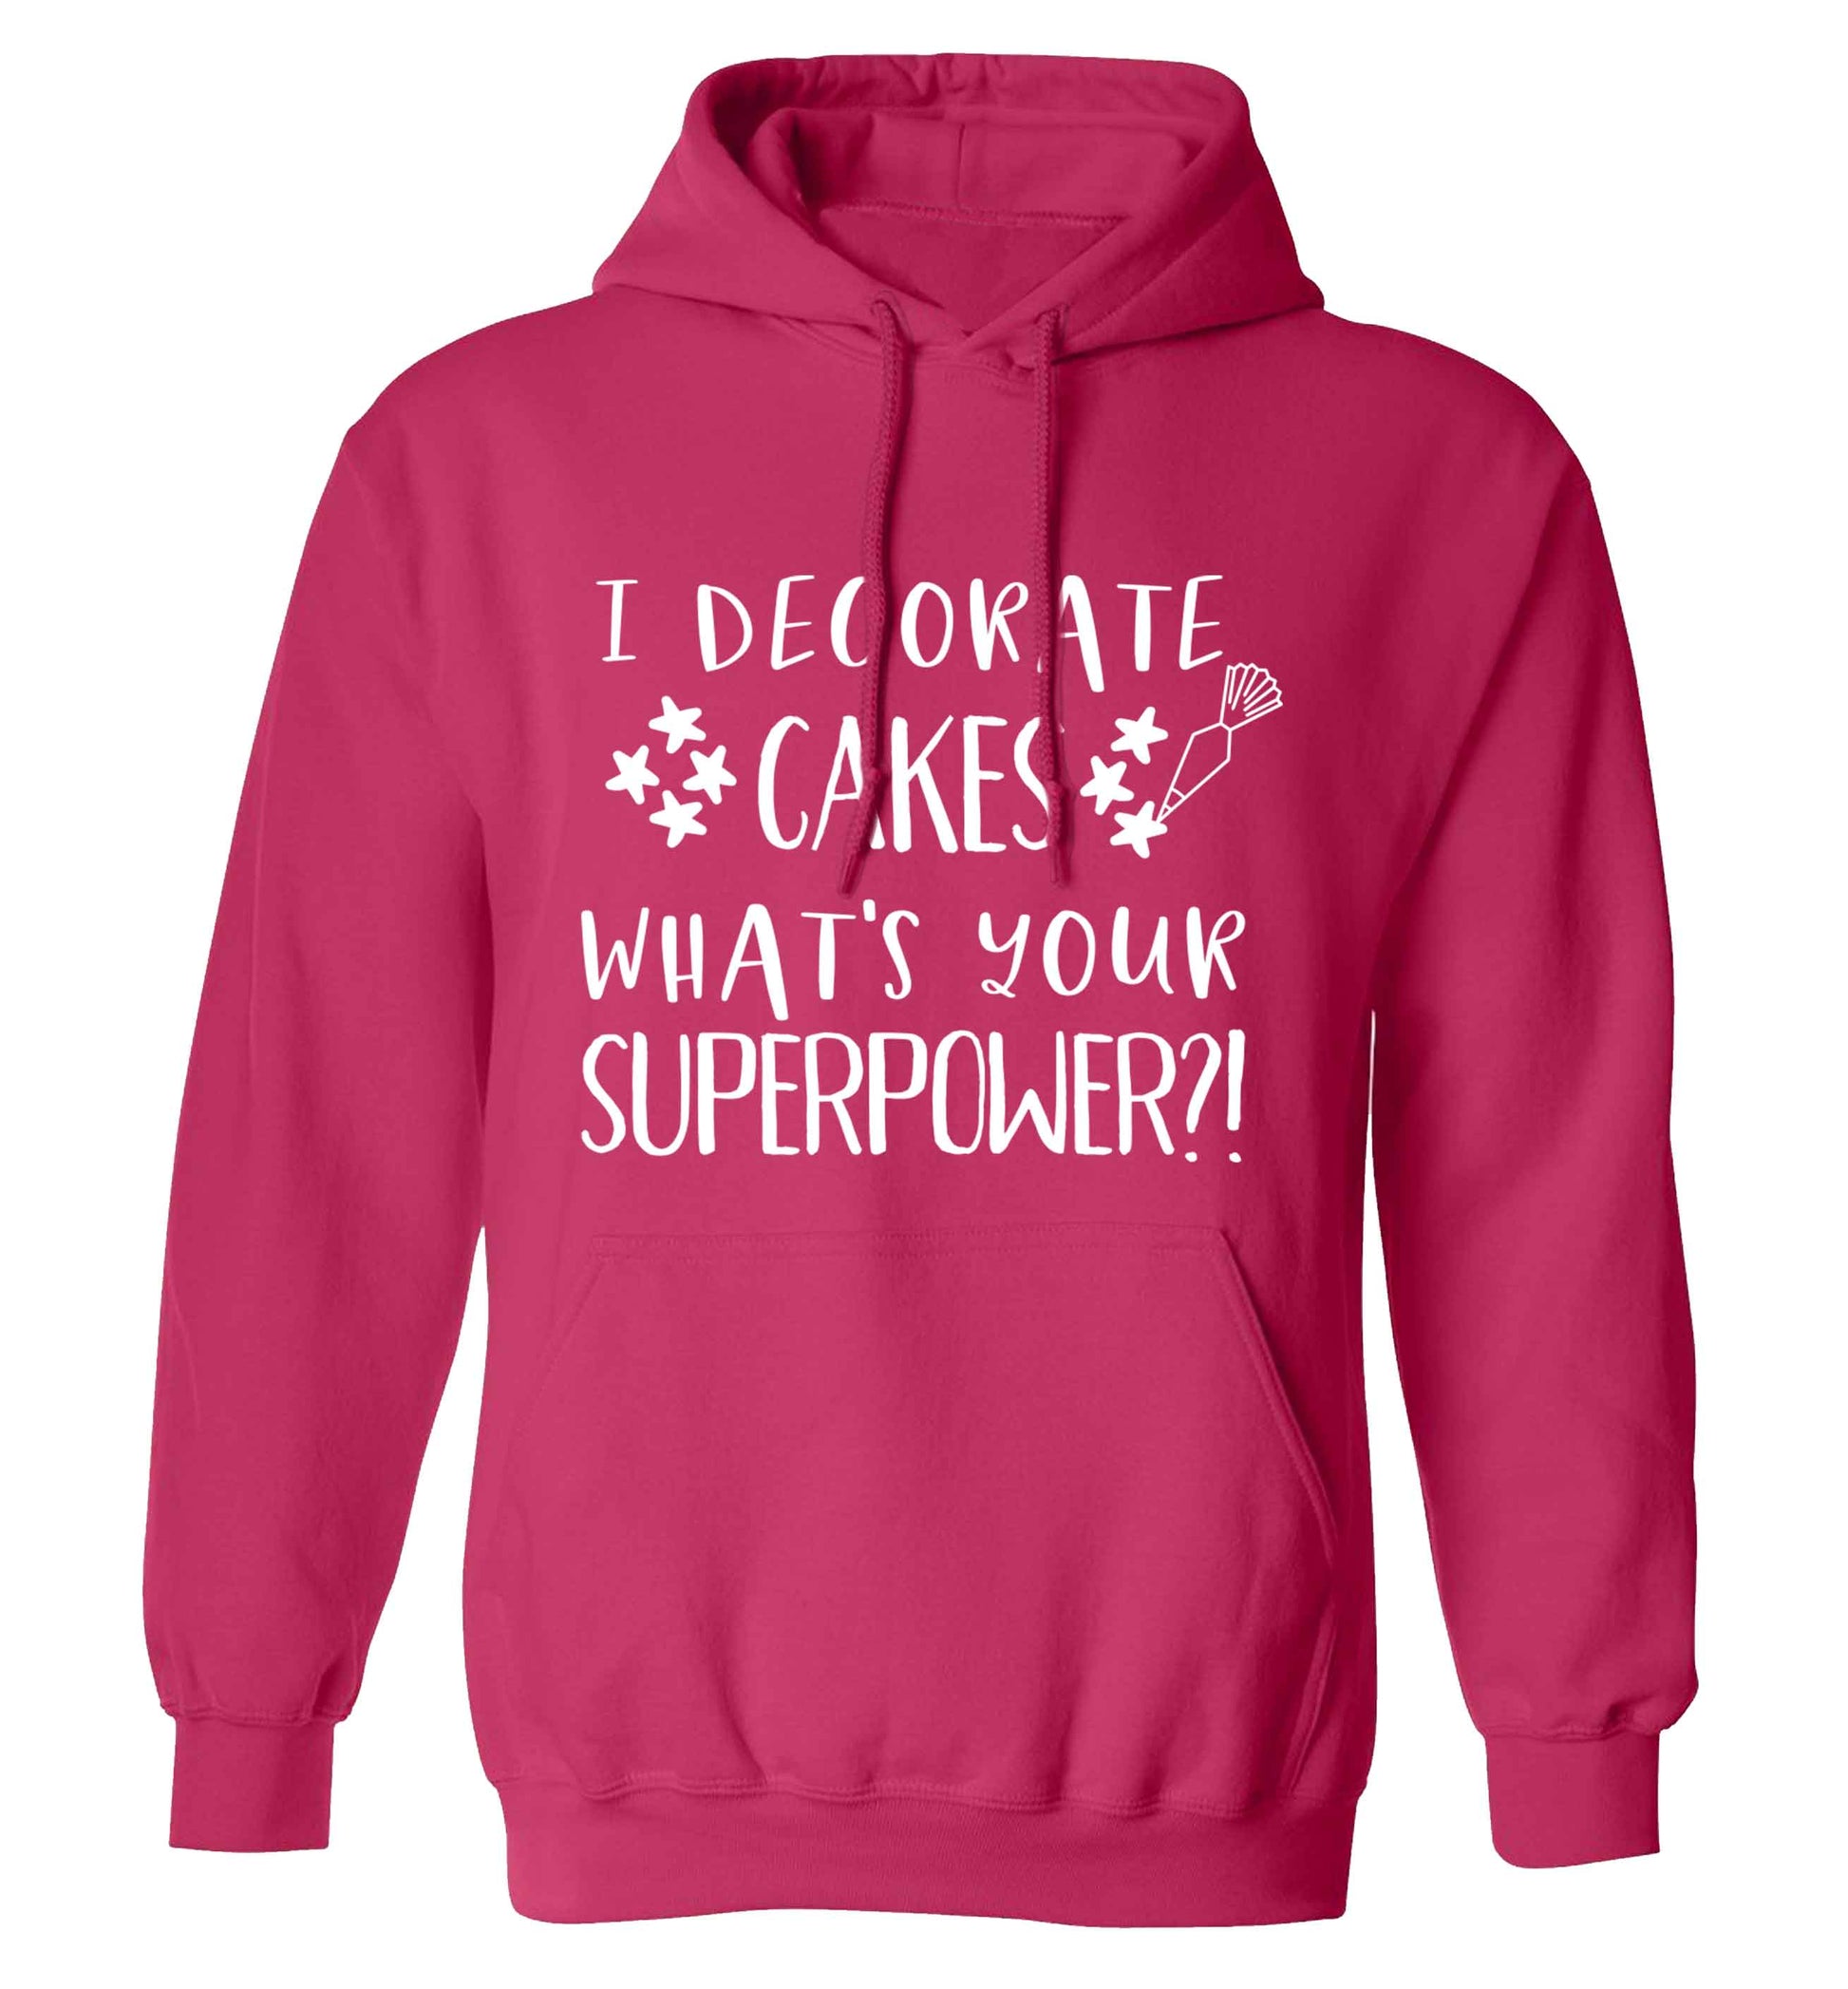 I decorate cakes what's your superpower?! adults unisex pink hoodie 2XL